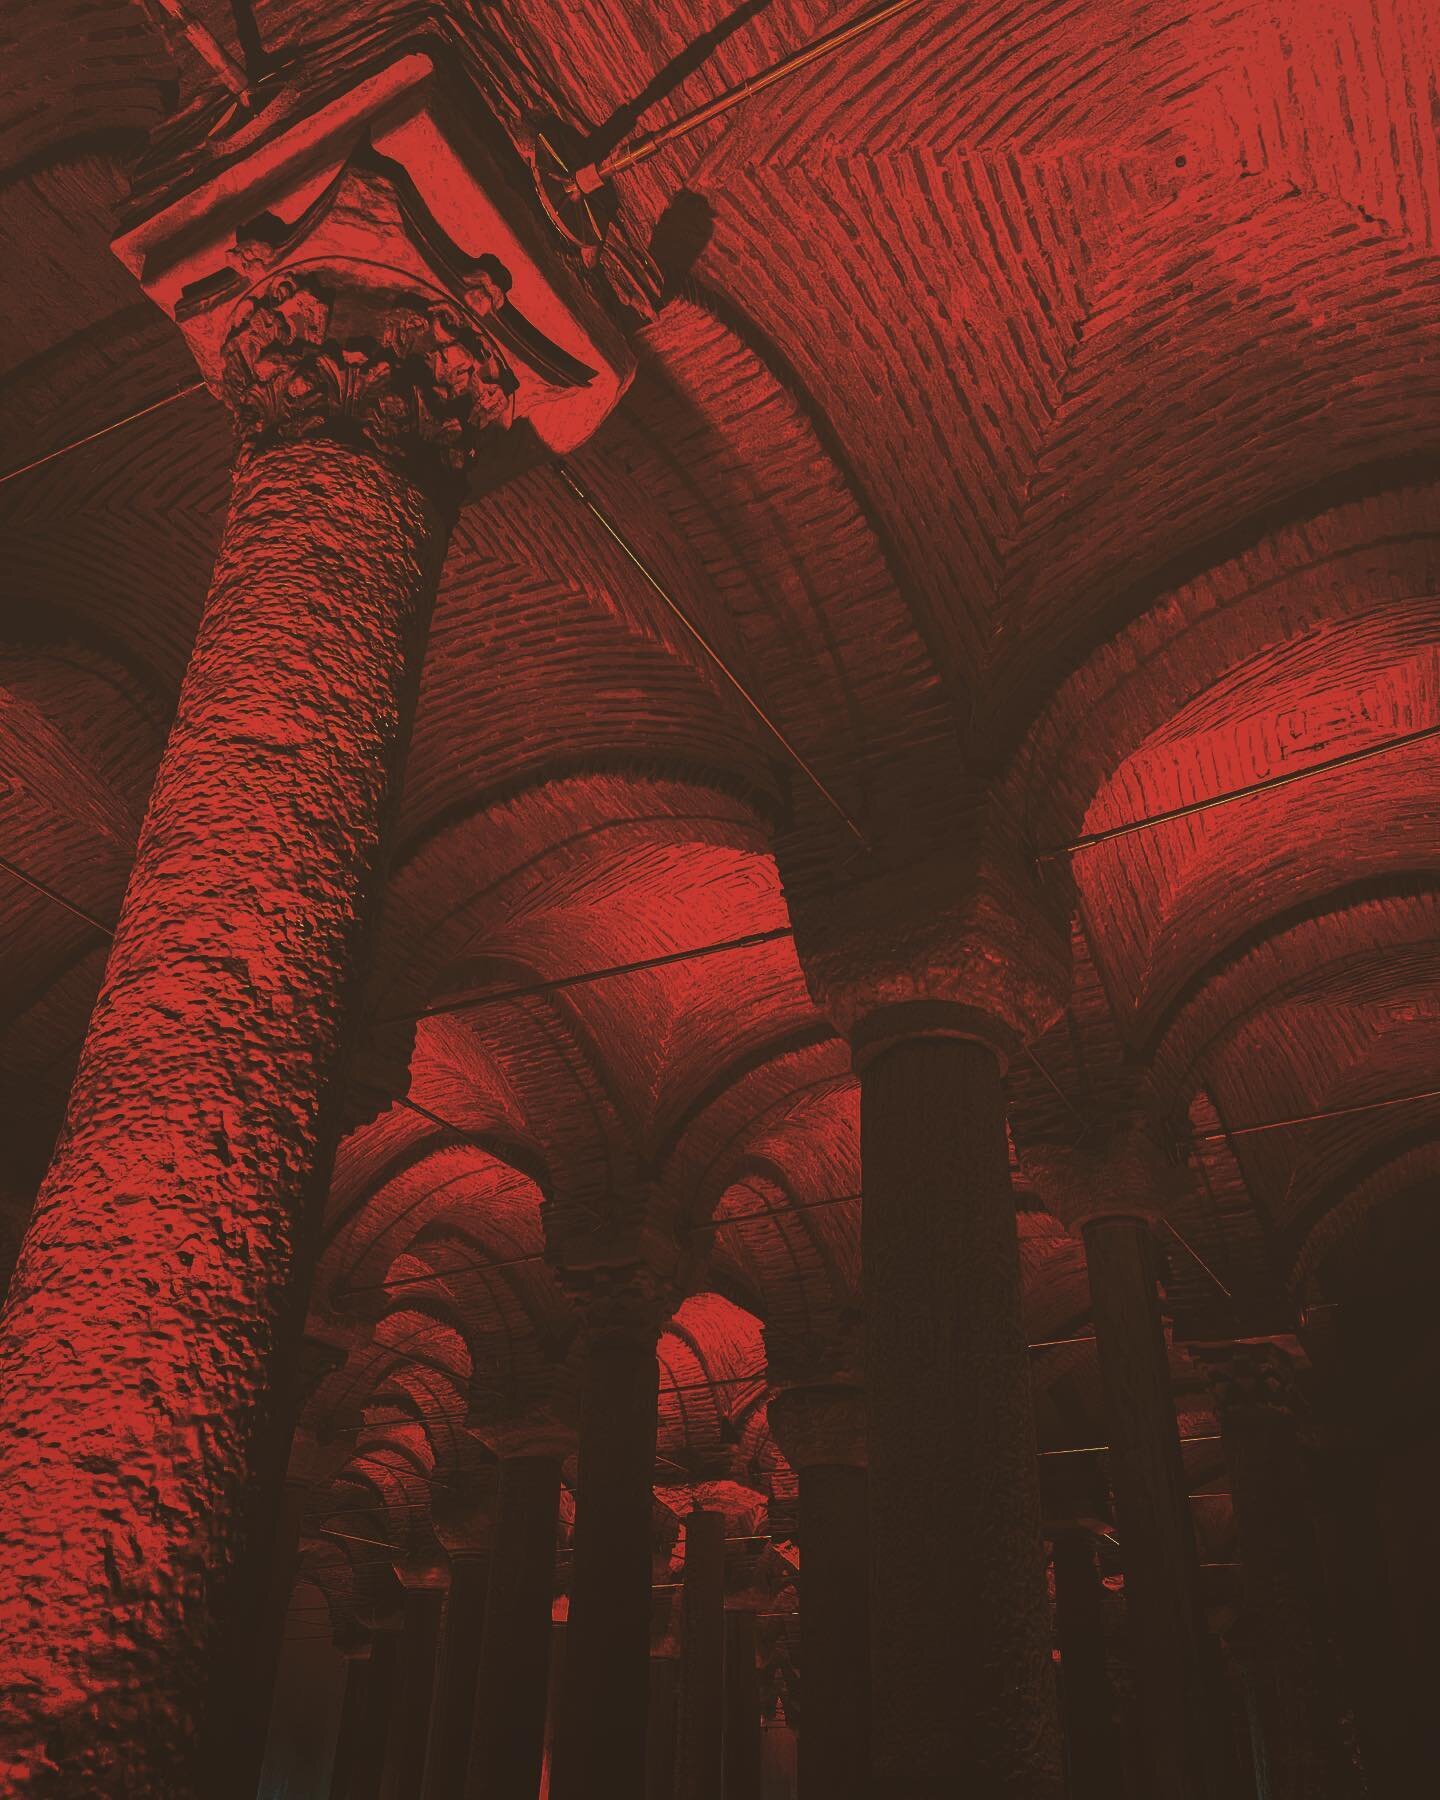 That&rsquo;s the second-biggest cistern I&rsquo;ve ever seen.

#photography #goth #gothic #architecture #urban #cities #design #urbandesign #infrastructure #atmosphere #ambient #grim #dark #Europe #sciencefiction #worldbuilding #lovecraft #horror #ma